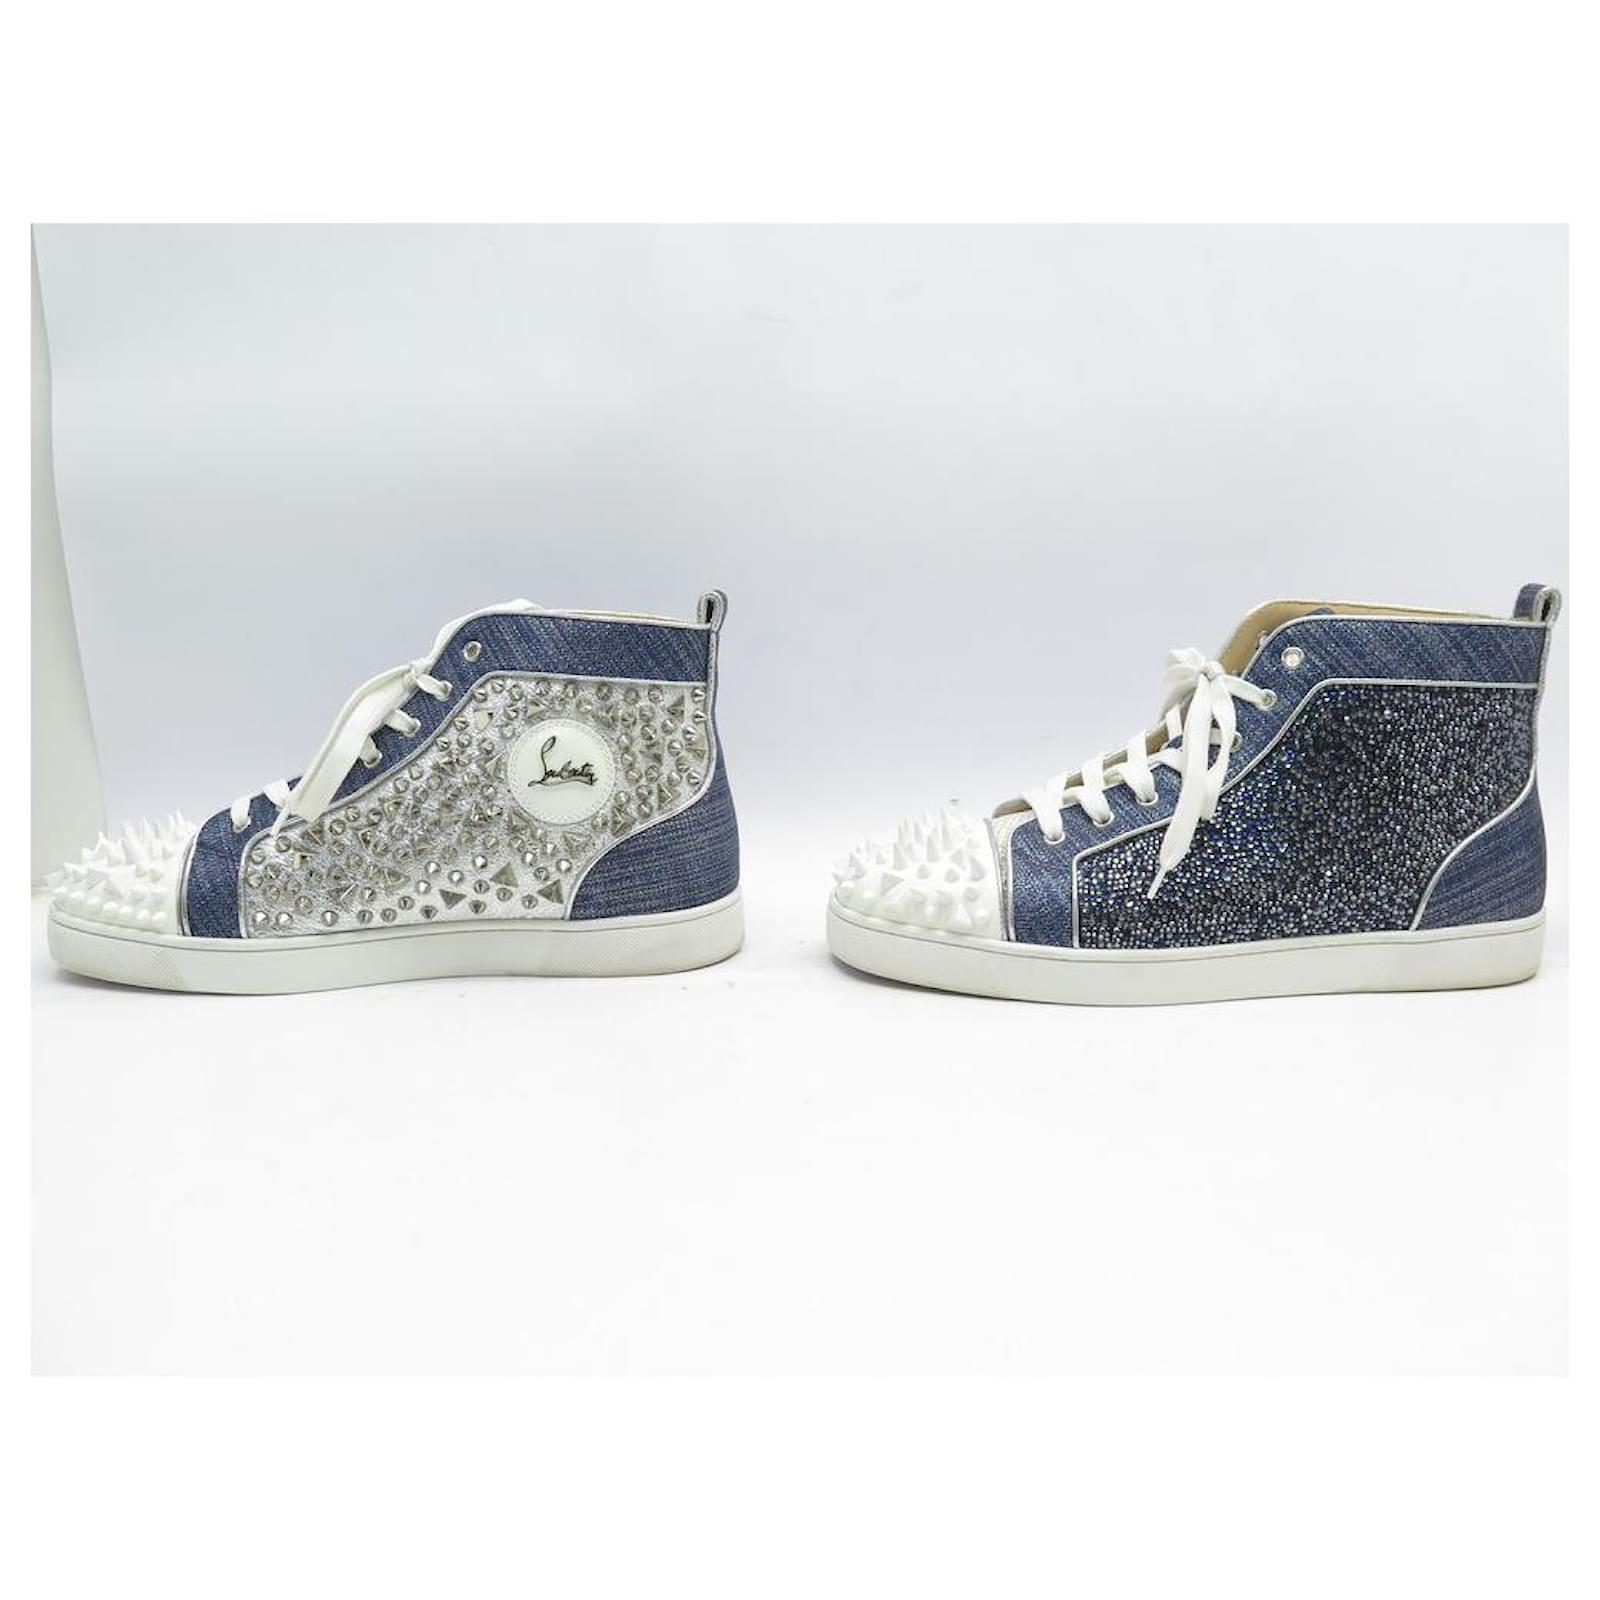 NEW CHRISTIAN LOUBOUTIN LOUIS MIX MID TOP SPIKED DENIM SHOES 45